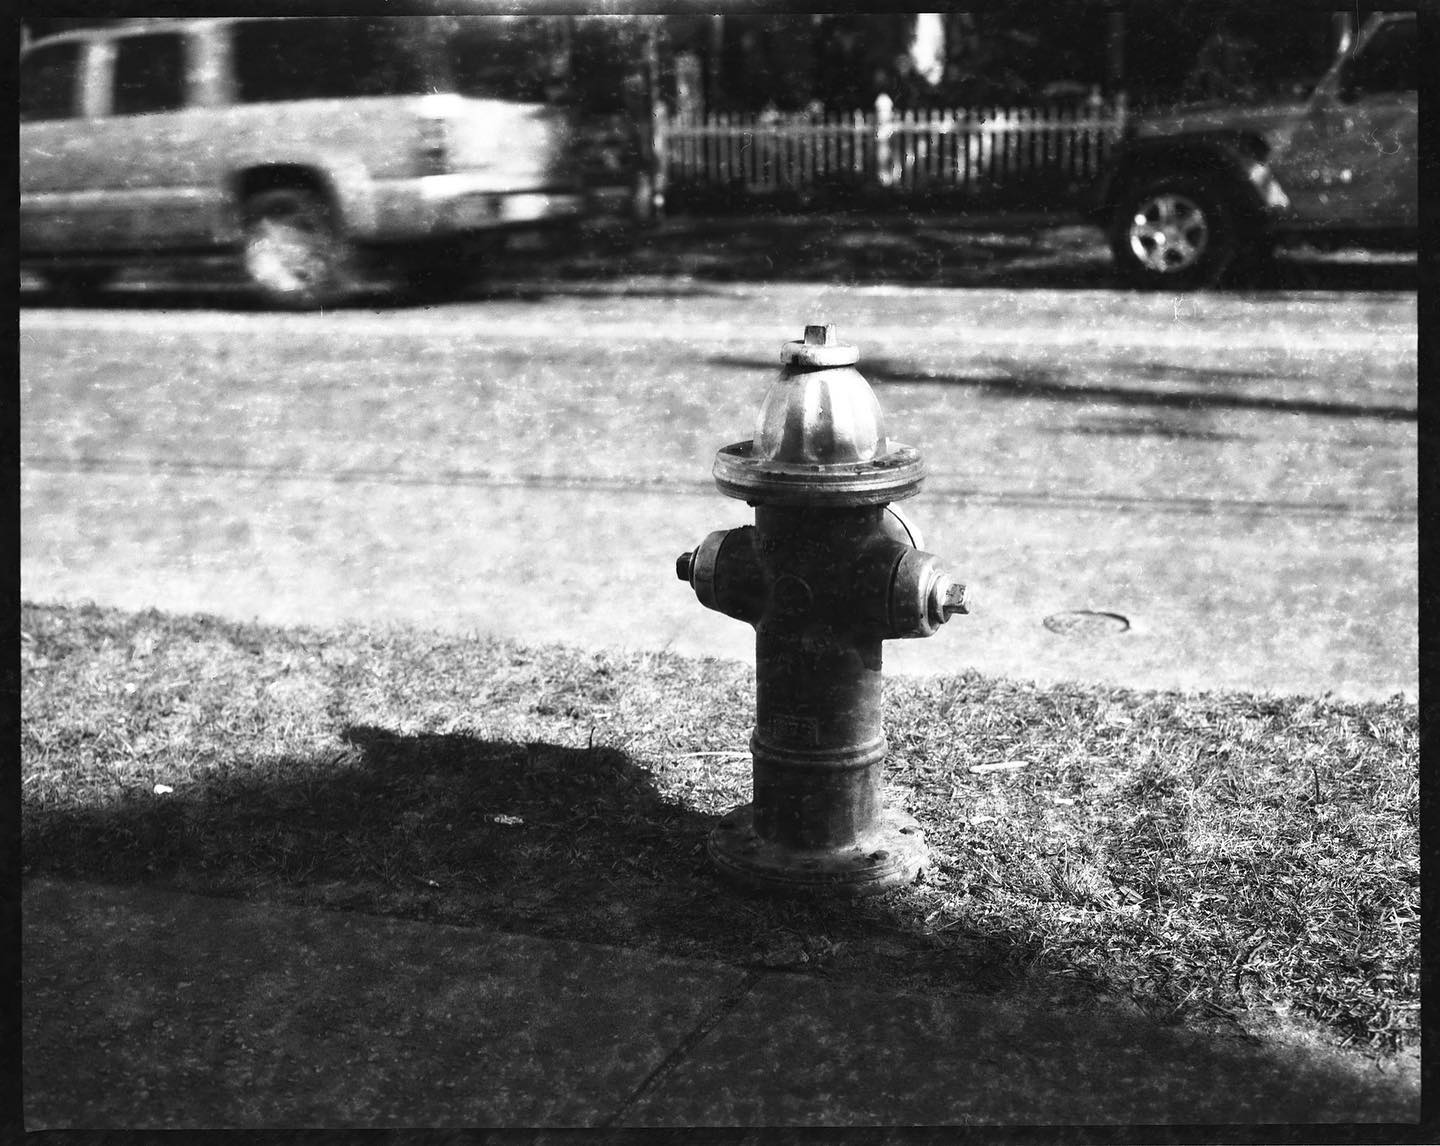 Hydrant.

Shot on well-expired #svema FN-64 (#expired 1992). Shot at EI20, which seems to be spot on. #film #rollfilm #rollfilmweek #ishootfilm #expiredfilm #filmphotography #filmphotographic